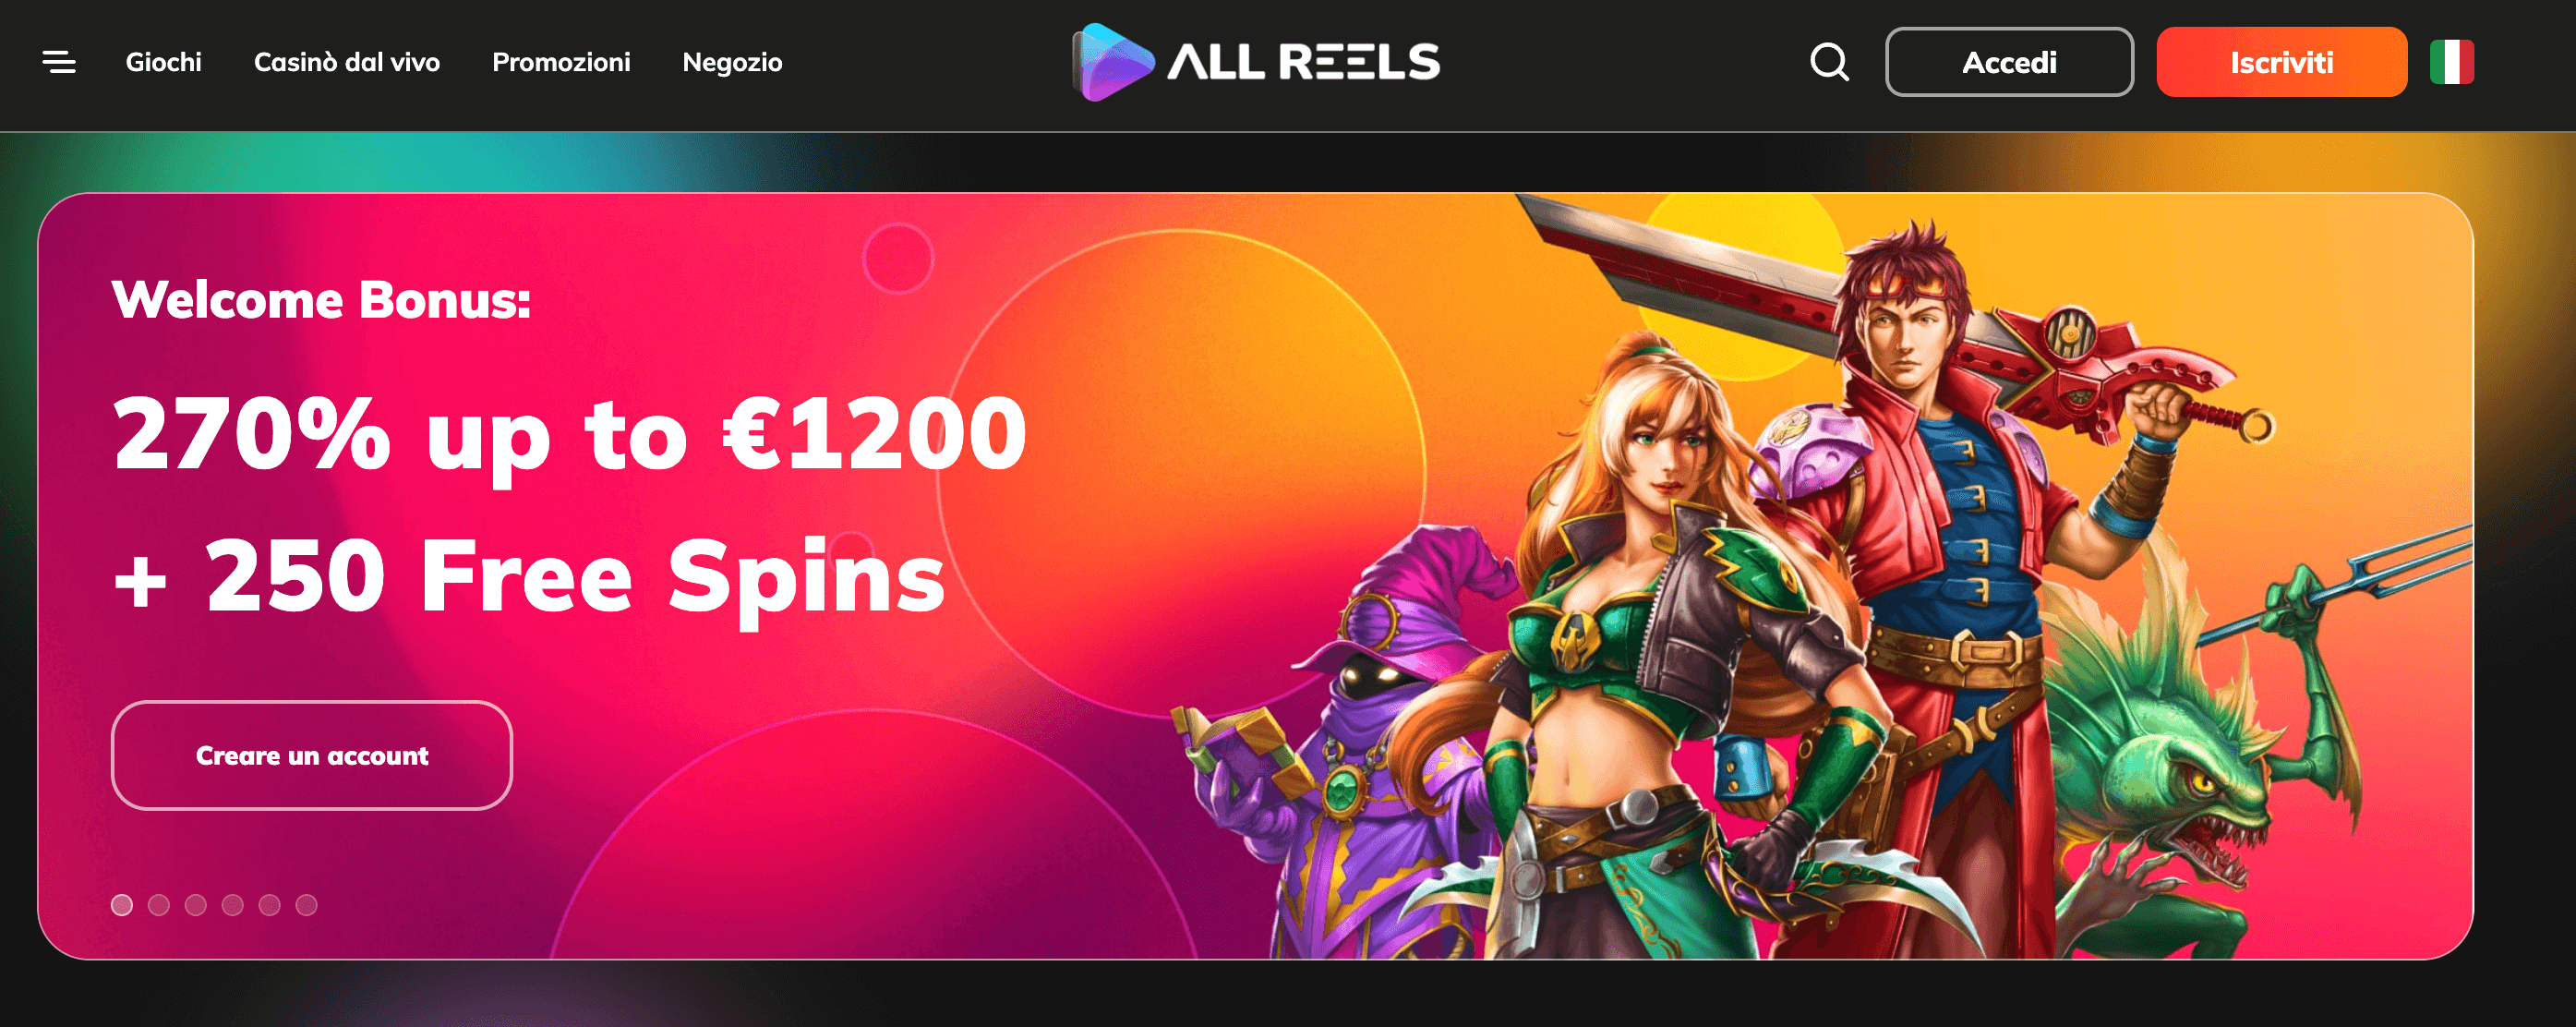 All Reels Casino Home